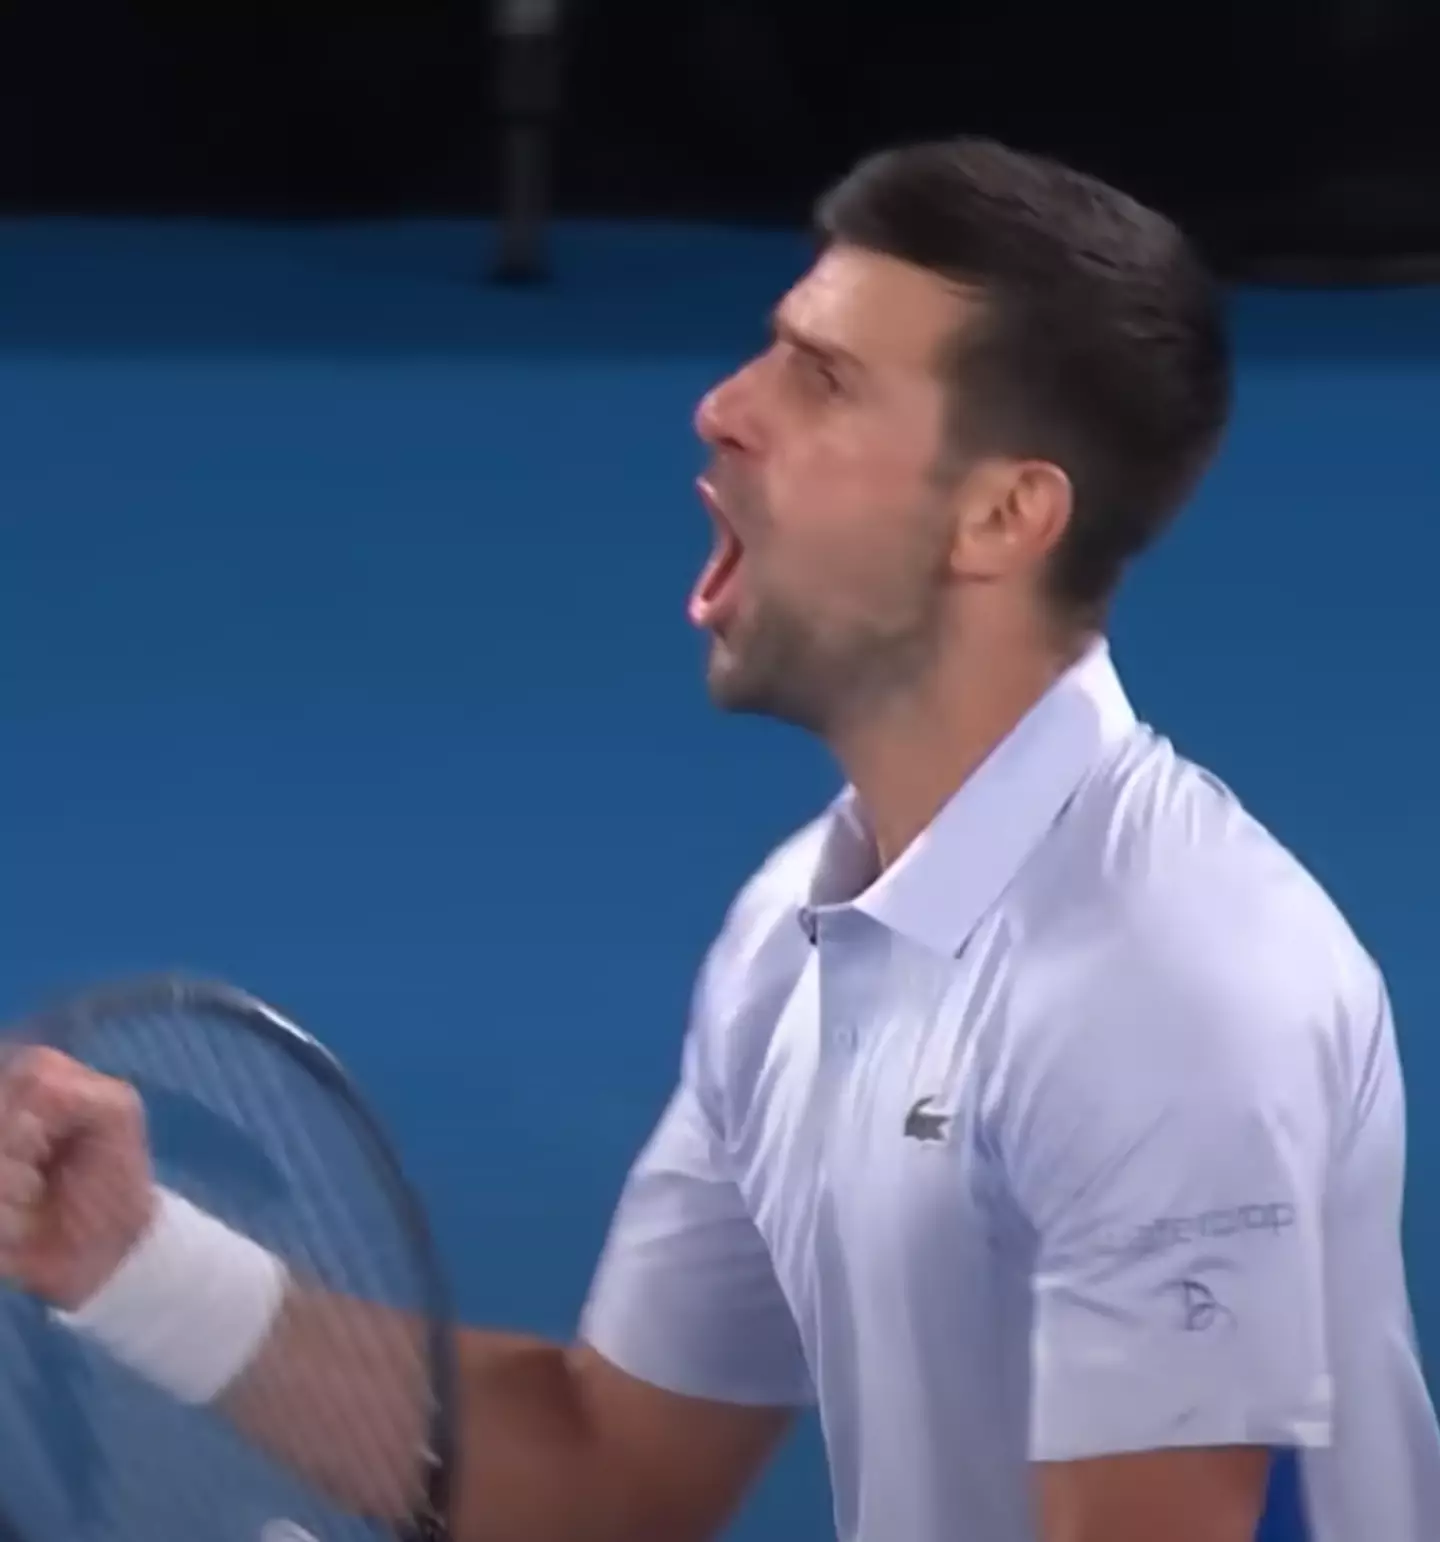 Australian Open viewers are calling for a spectator to be banned after throwing a rude gesture during Novak Djokovic's match with teenage sensation Dino Prizmic.